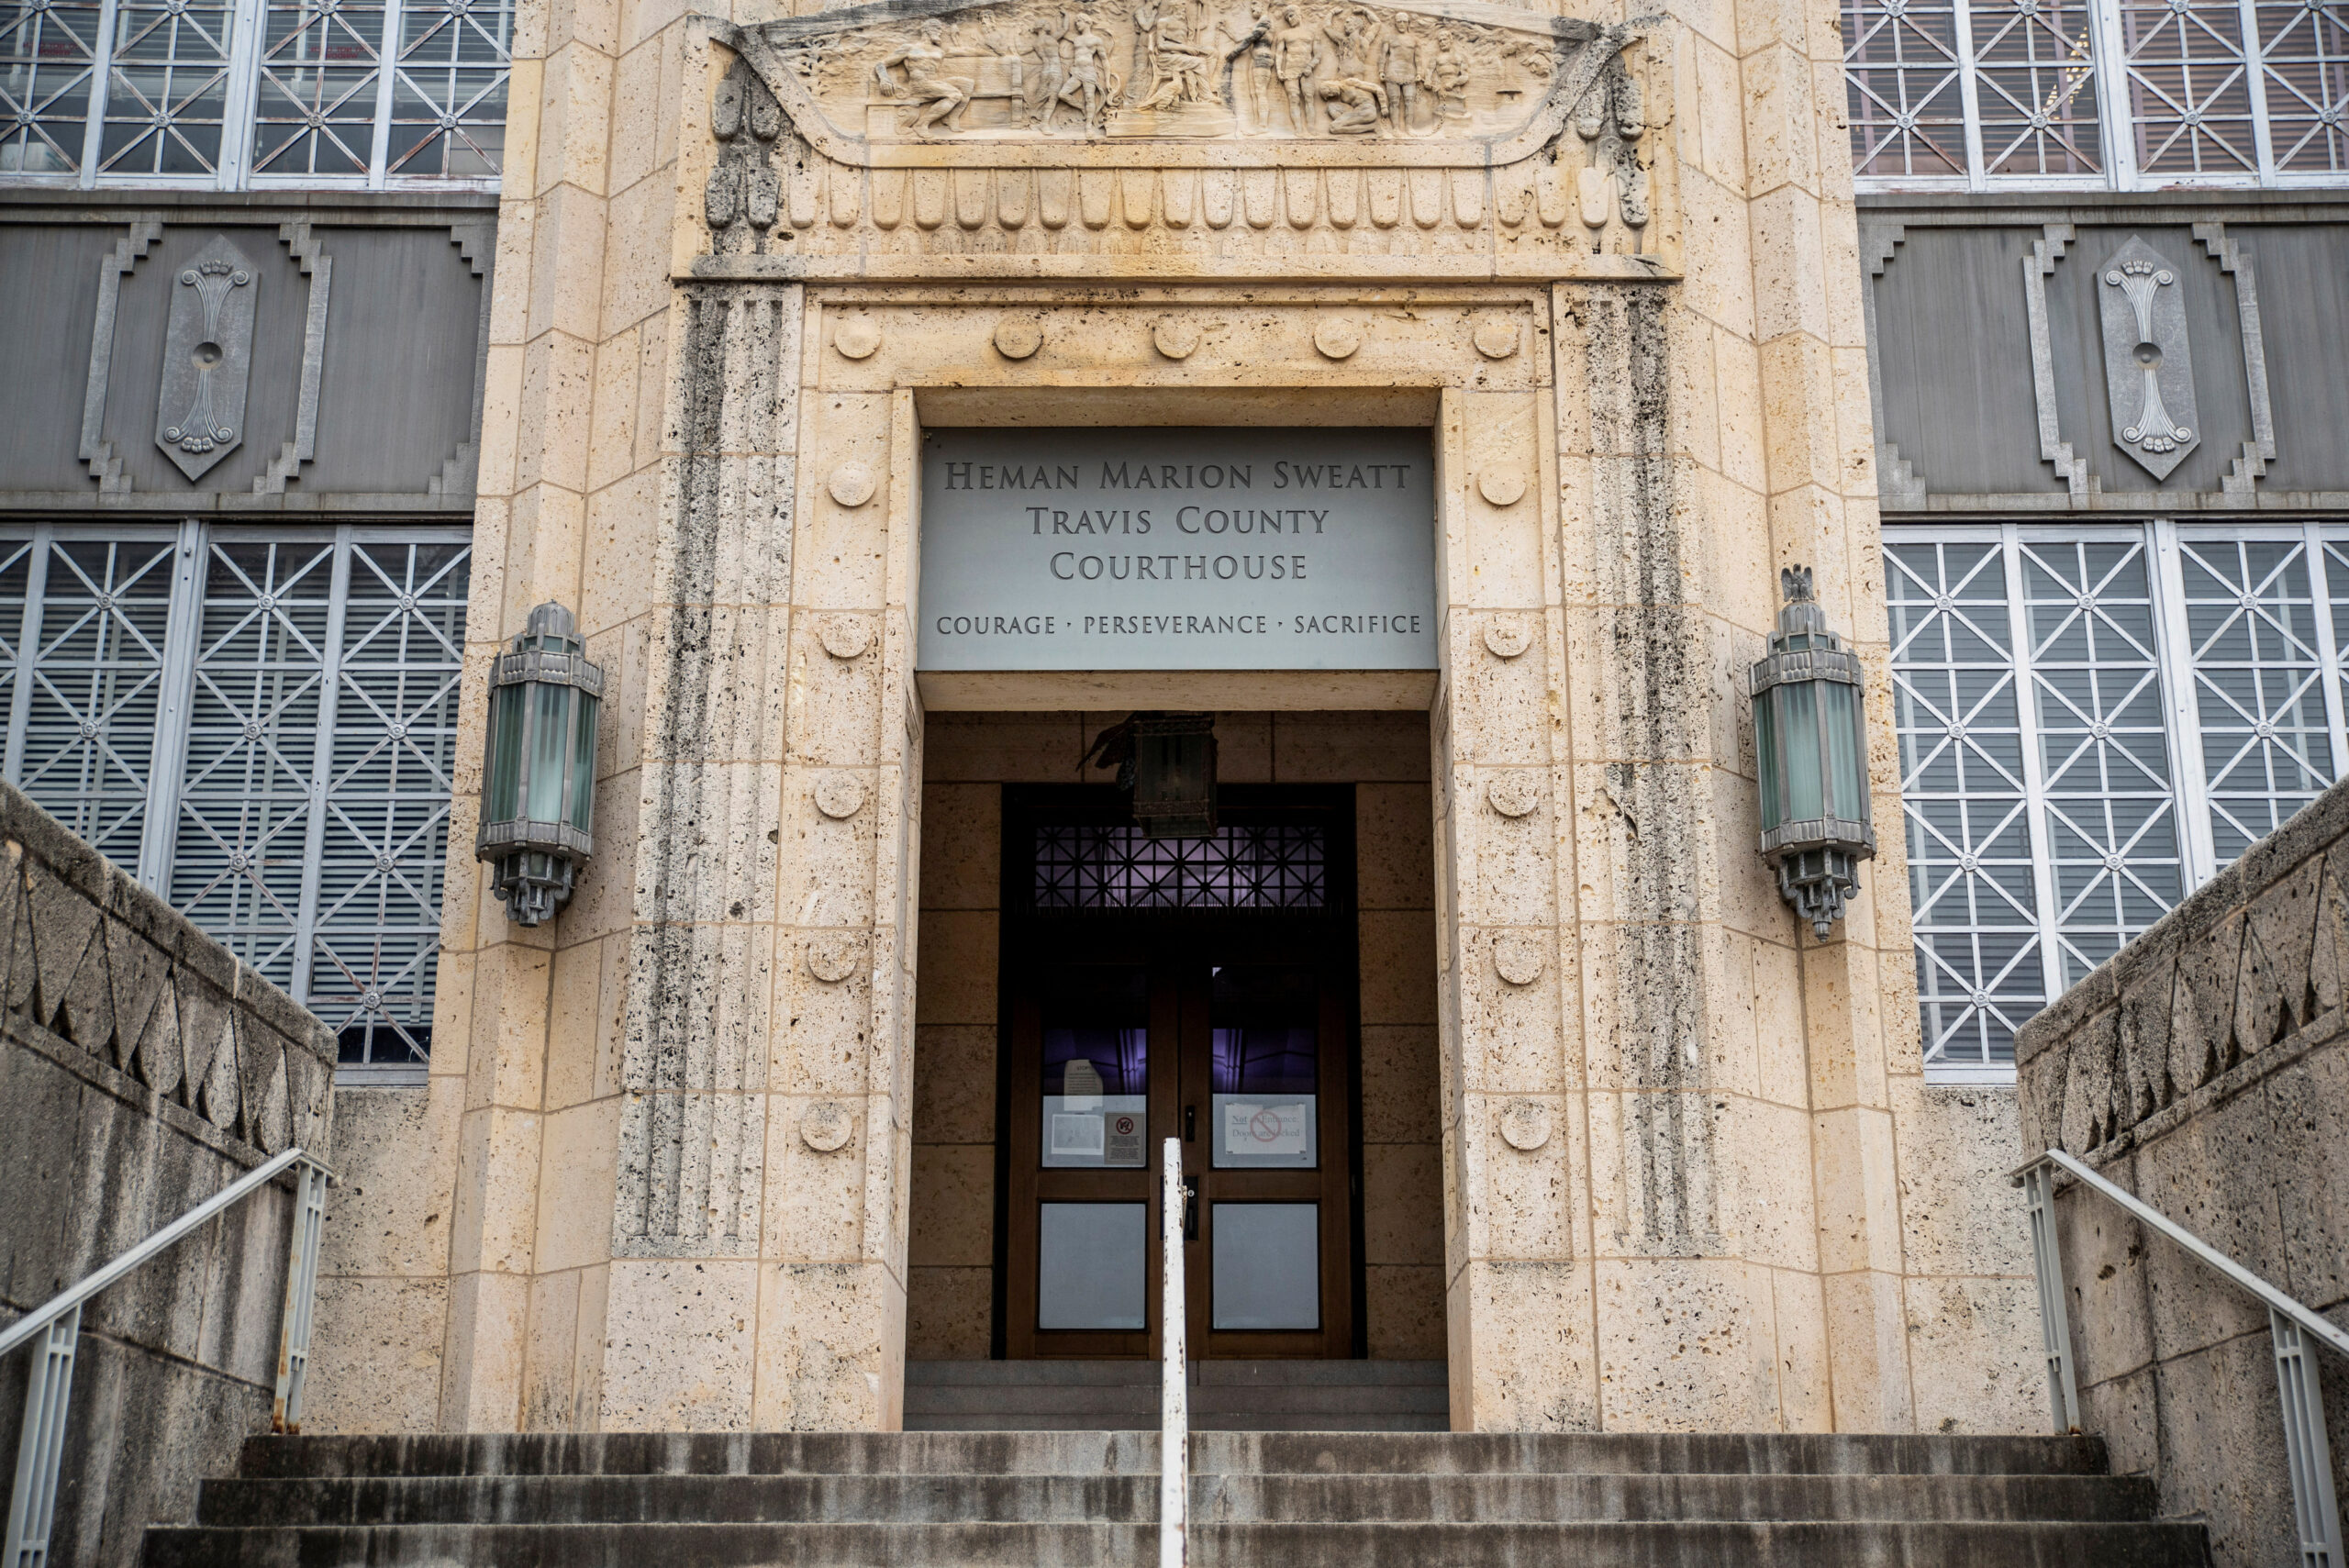 File photo of the District Courthouse in Austin, Texas. On Aug. 31, 2023, the Supreme Court of Texas allowed a law banning certain types of medical or surgical gender reassignment procedures for minors who identify as transgender to go into effect. (OSV News photo/Sergio Flores, Reuters)